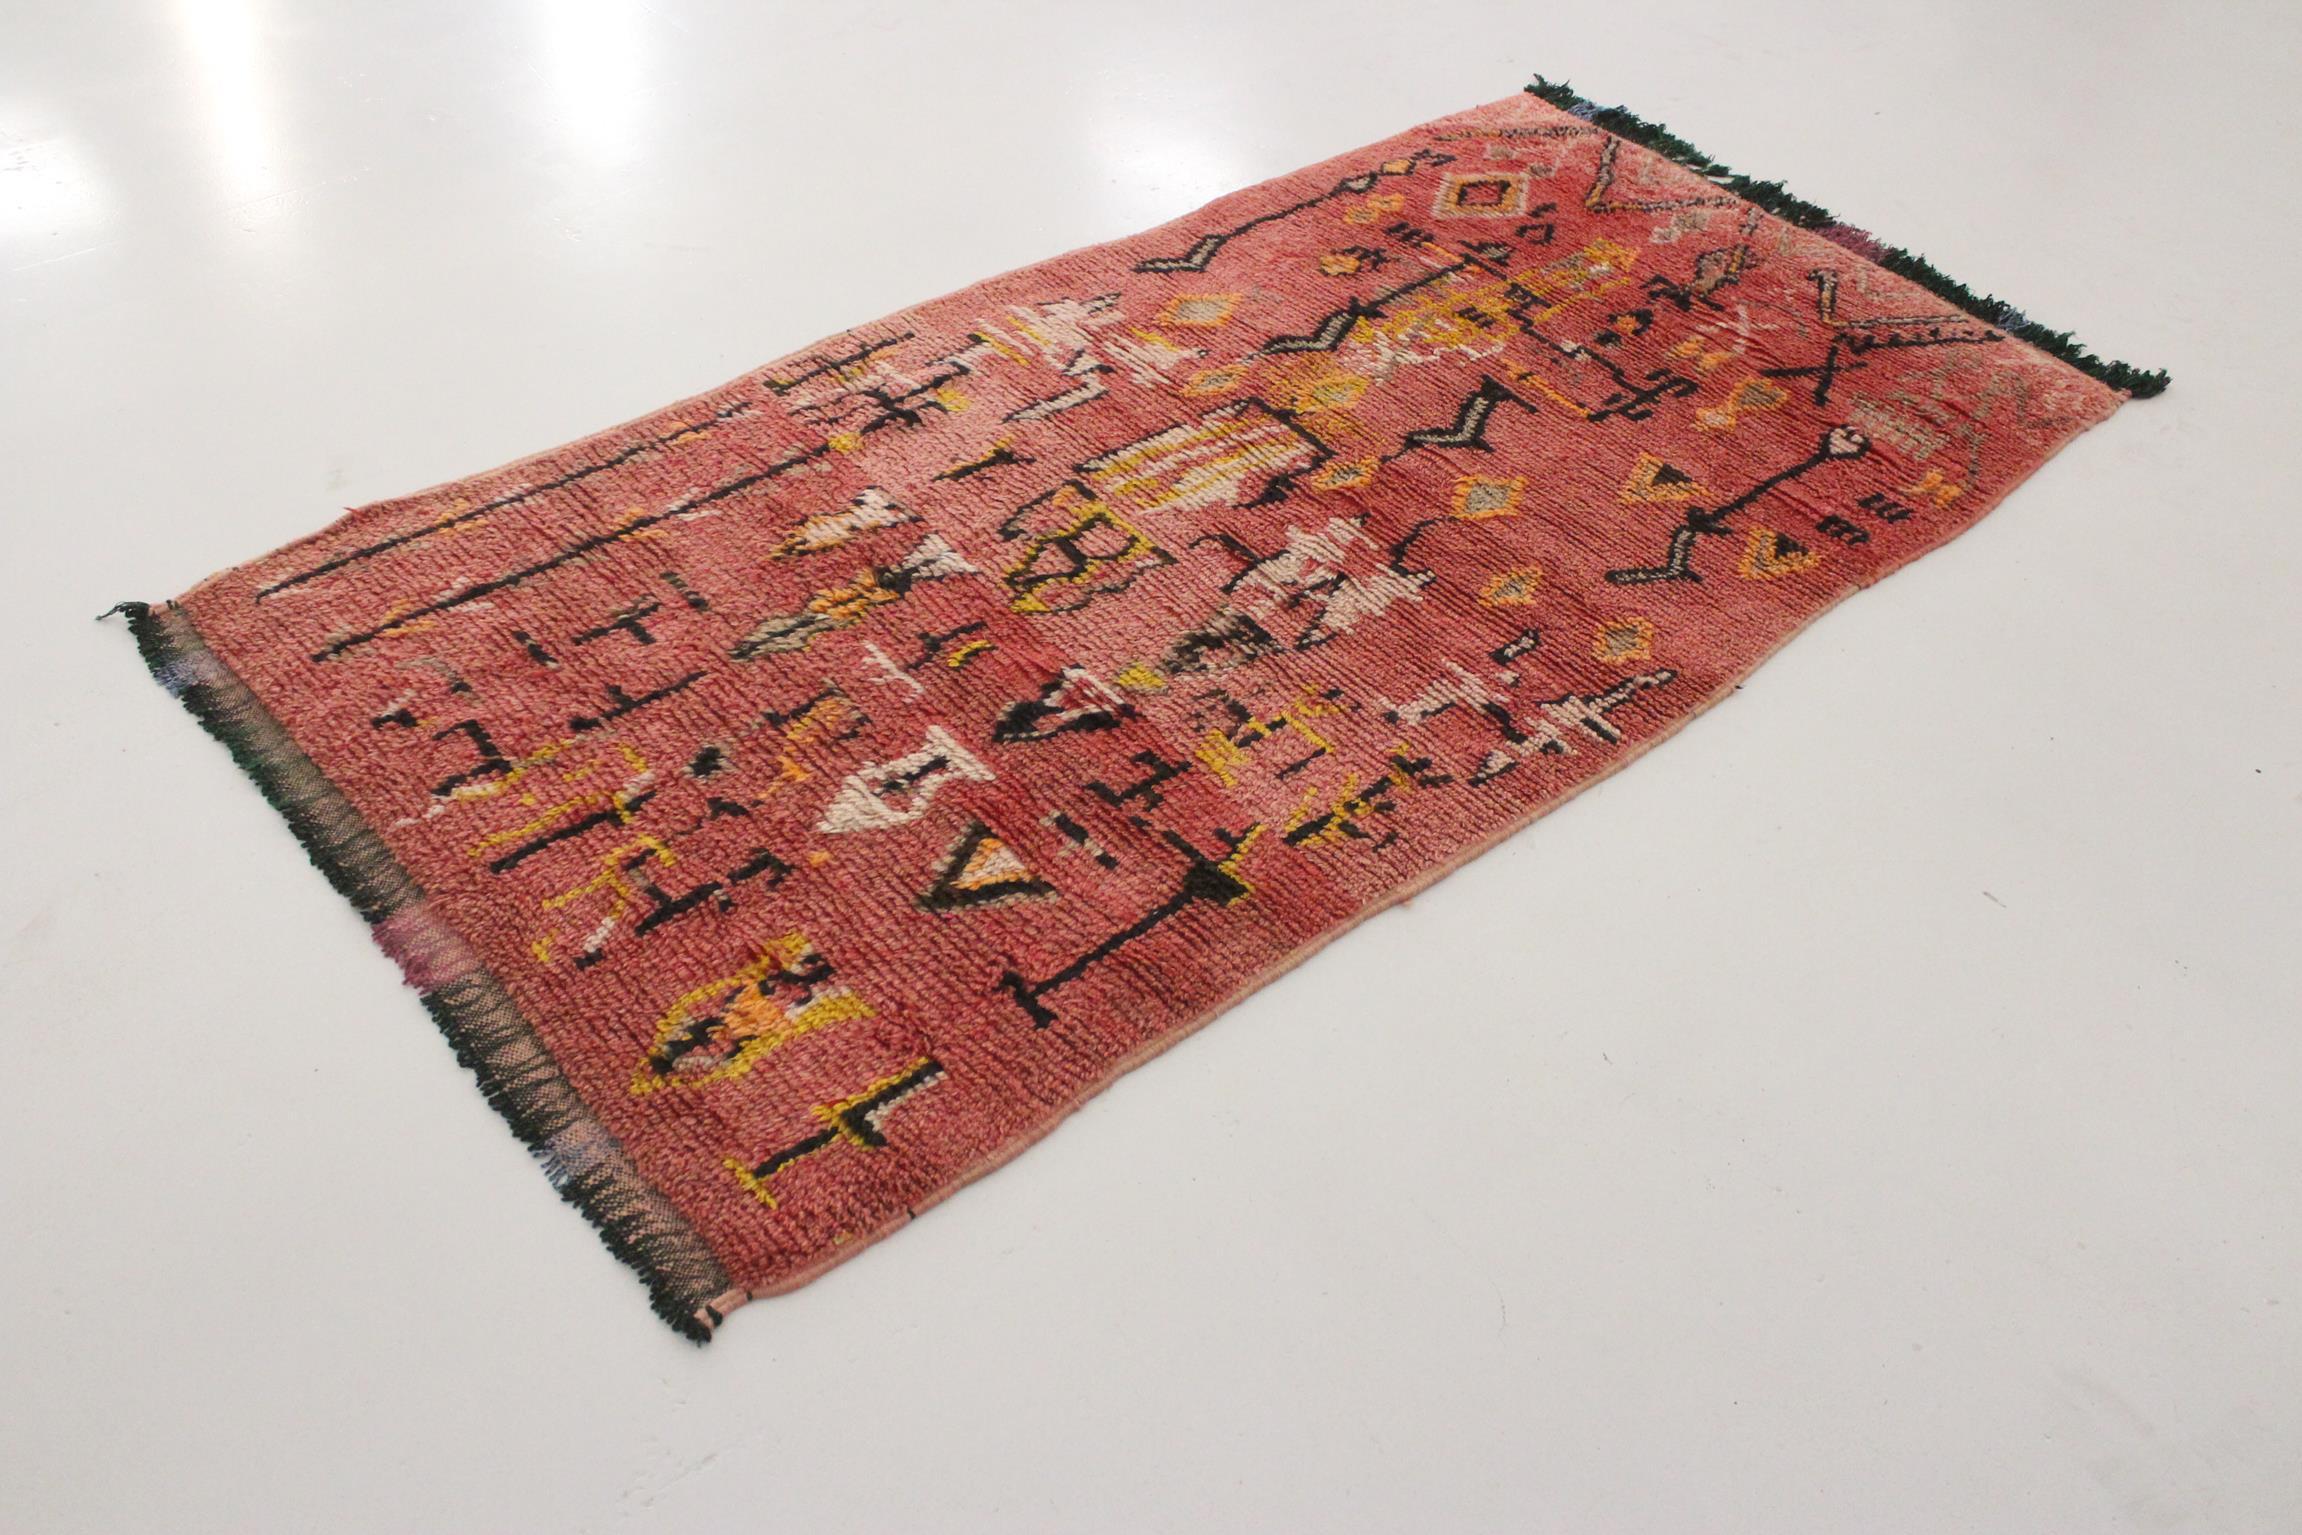 Vintage Moroccan Azilal rug - Pink and yellow - 3.7x7.7feet / 114x236cm In Good Condition For Sale In Marrakech, MA